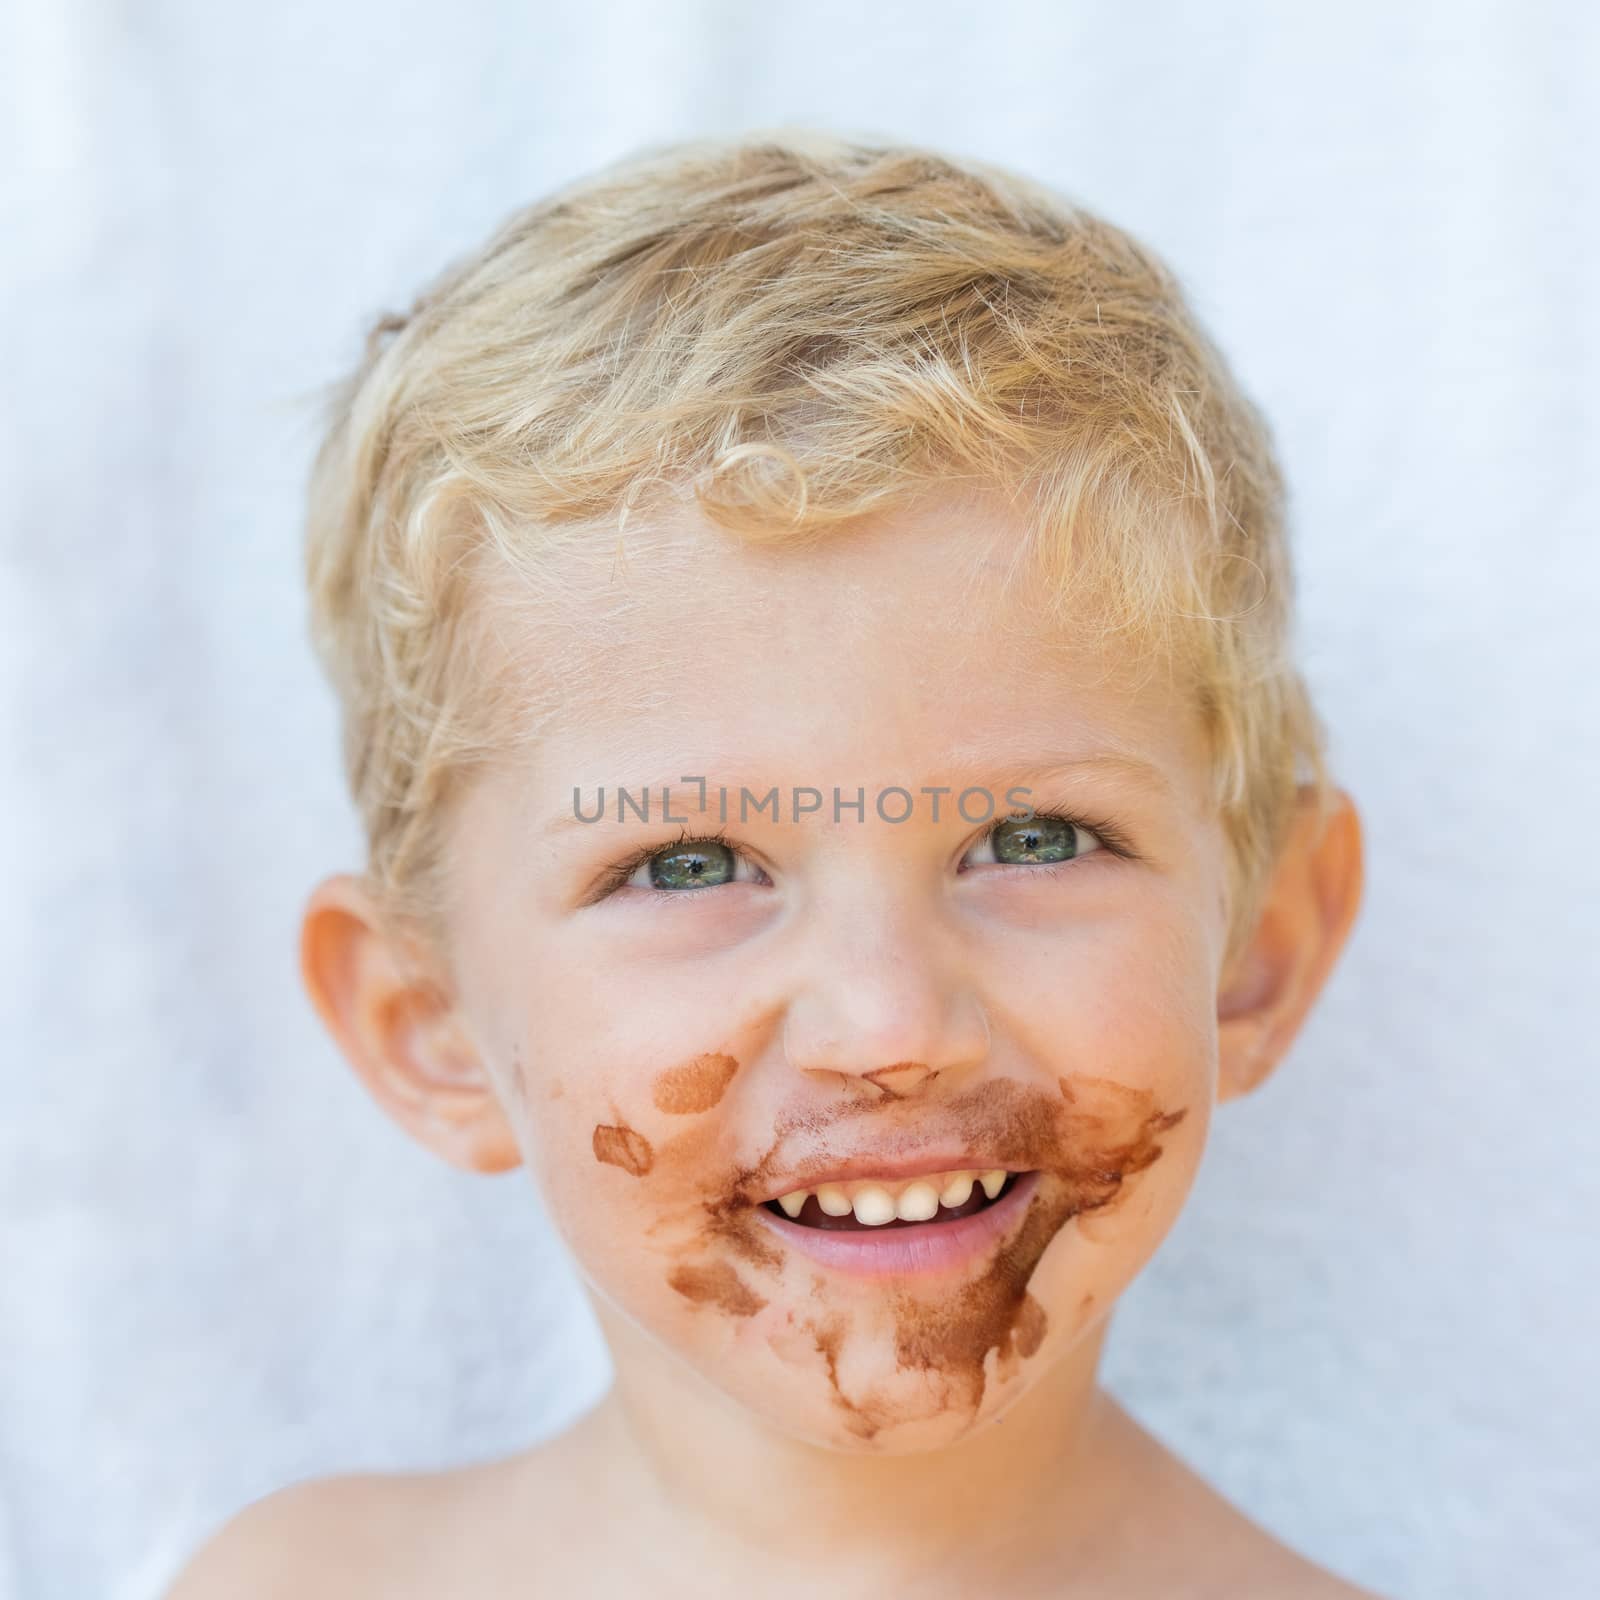 baby boy with chocolate on his face close up by Robertobinetti70